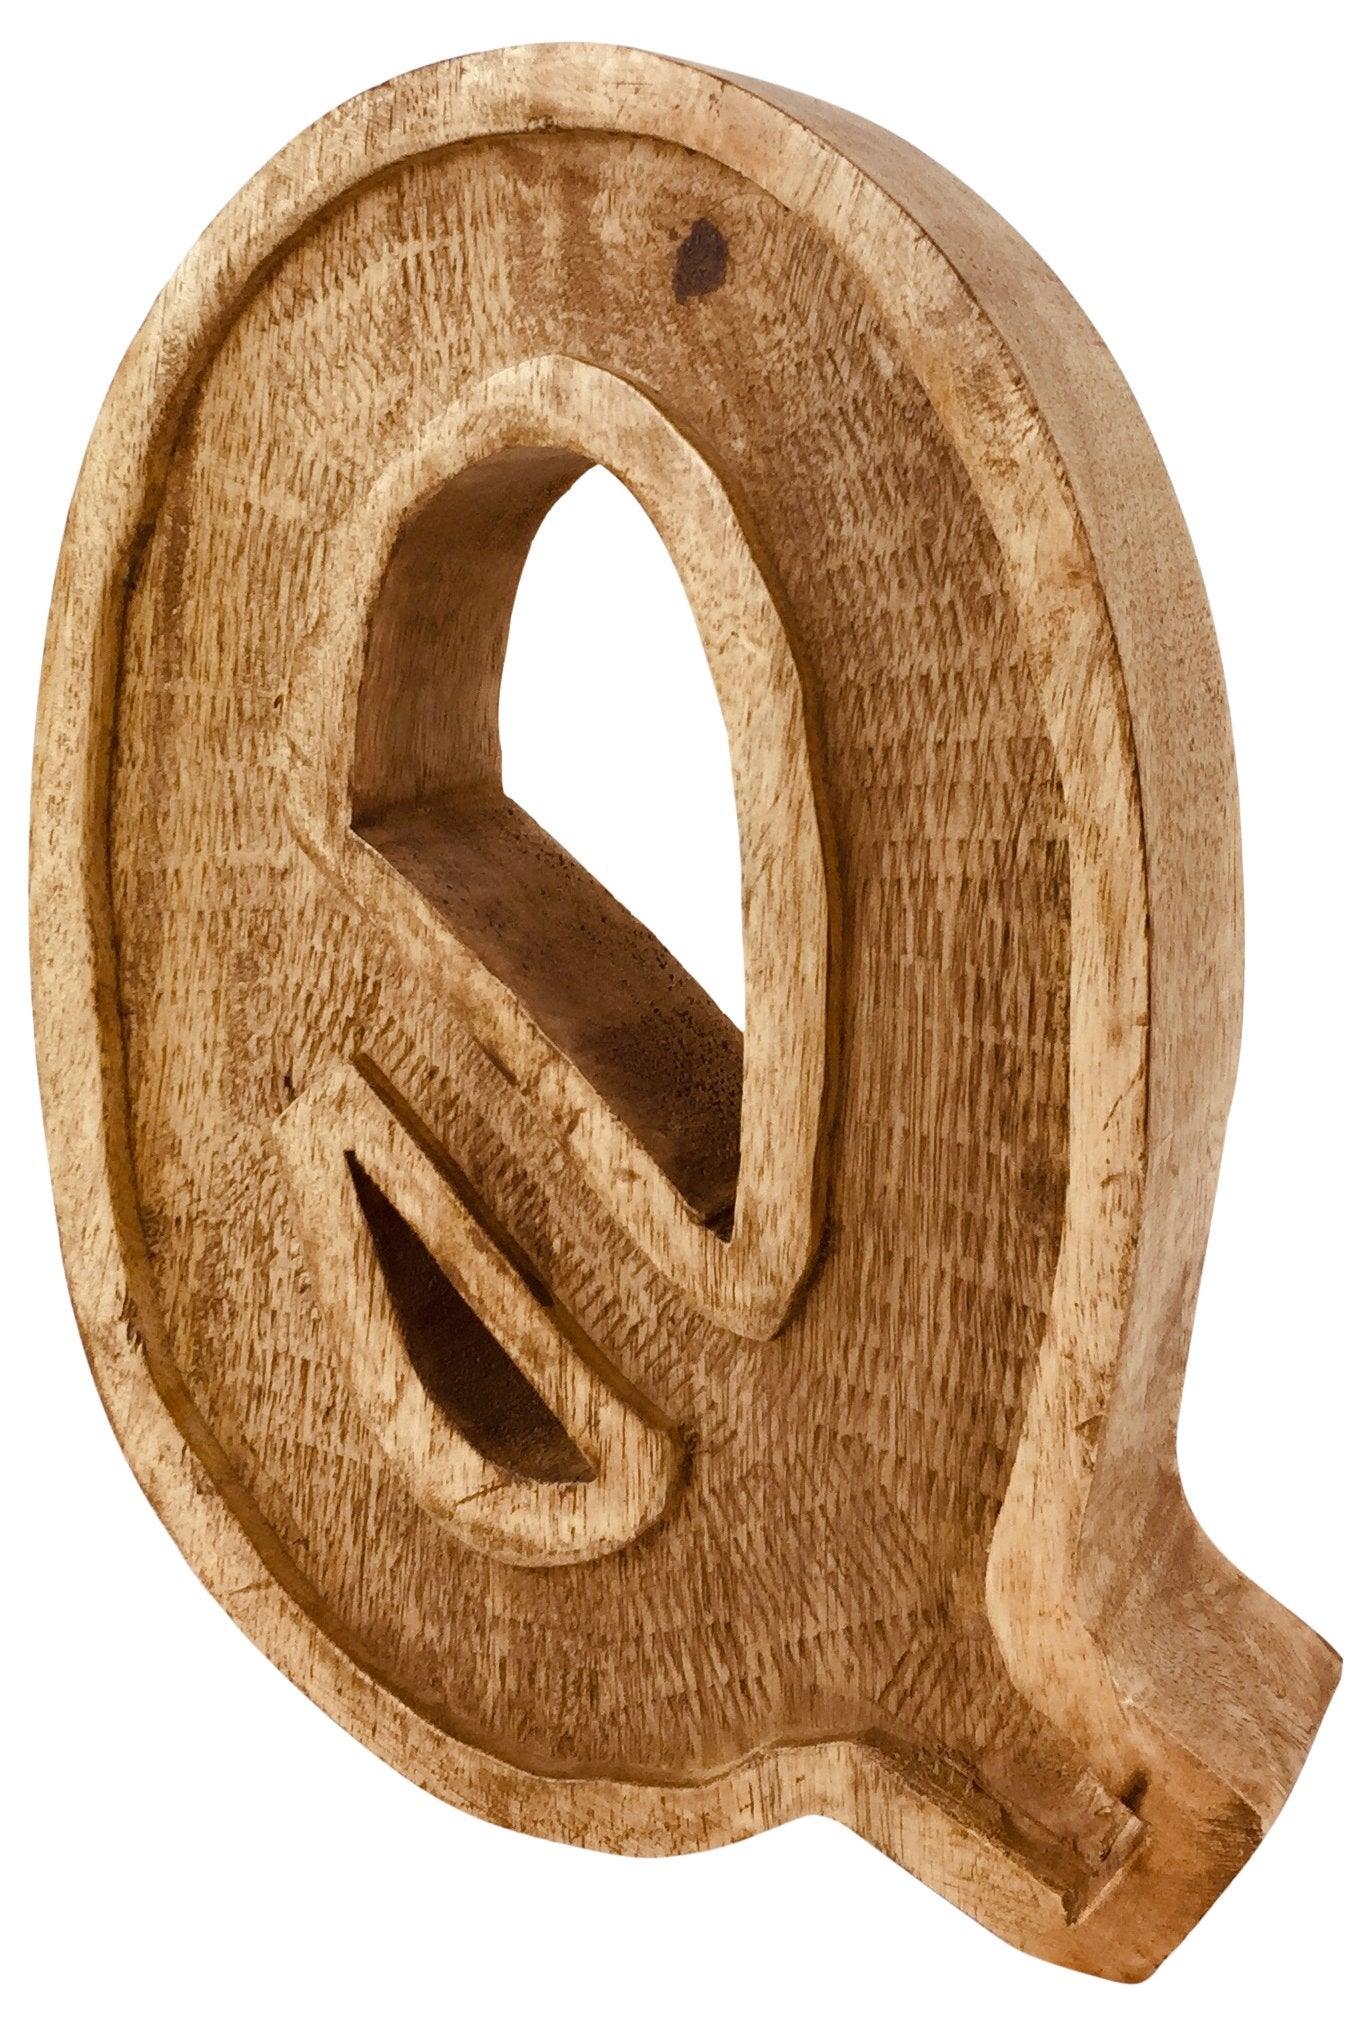 View Hand Carved Wooden Embossed Letter Q information